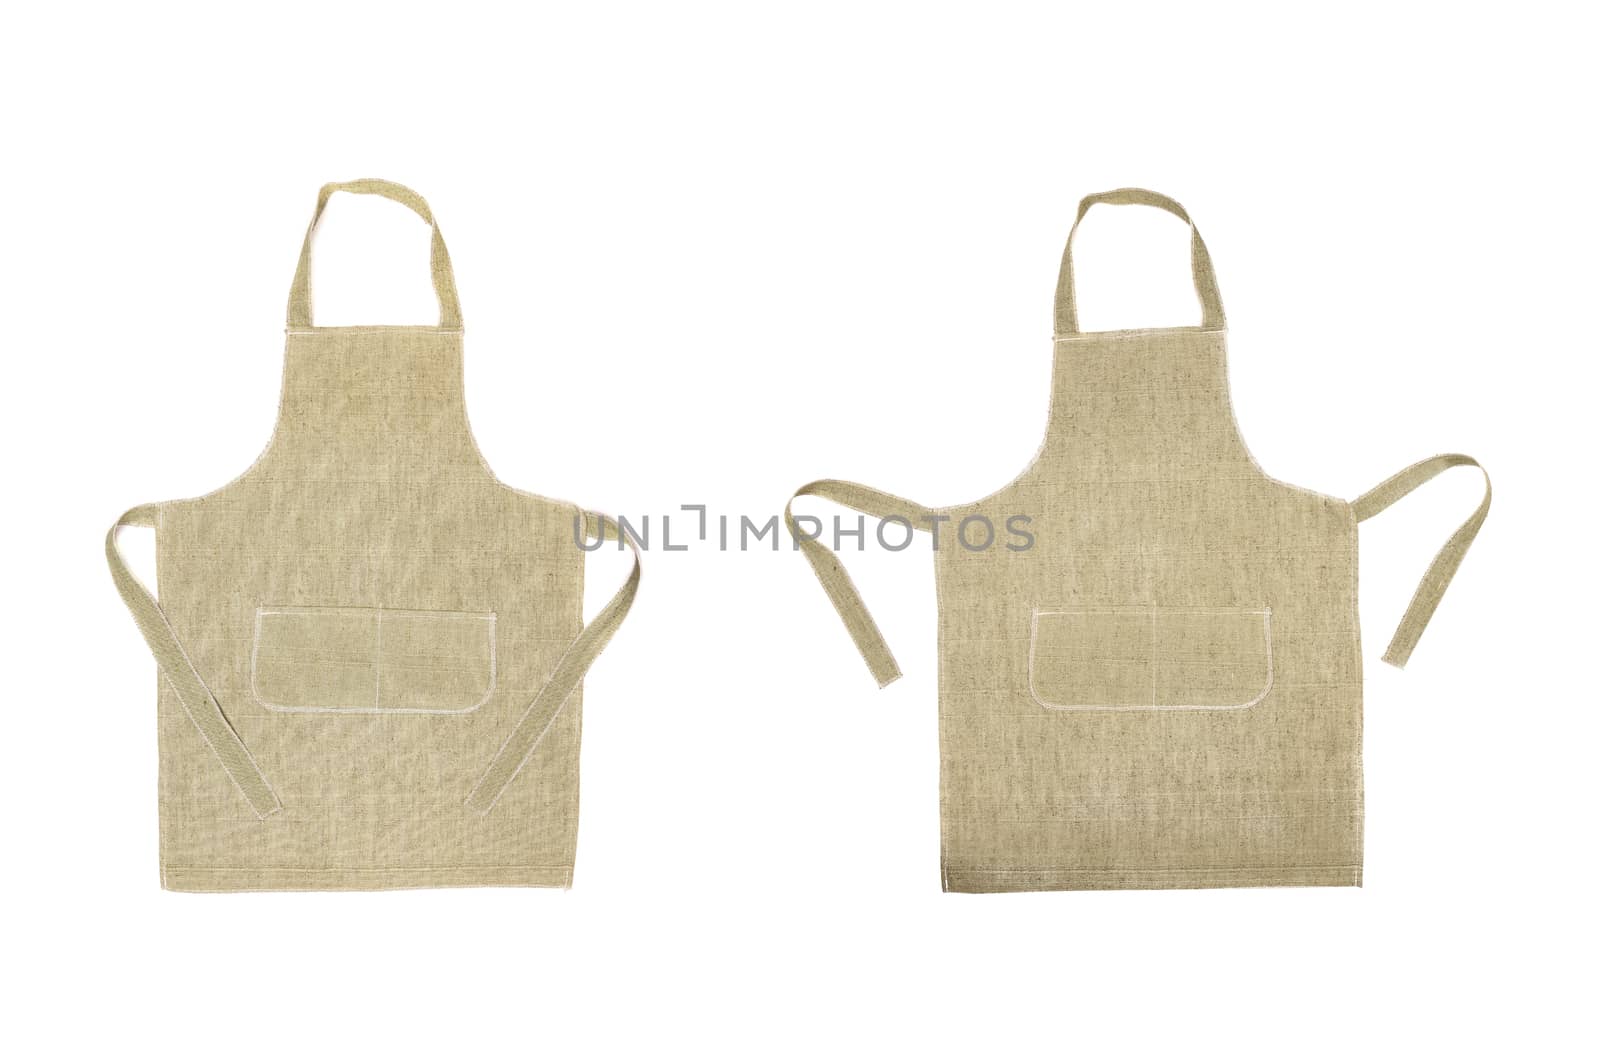 Two kitchen gray aprons. Front view. by indigolotos